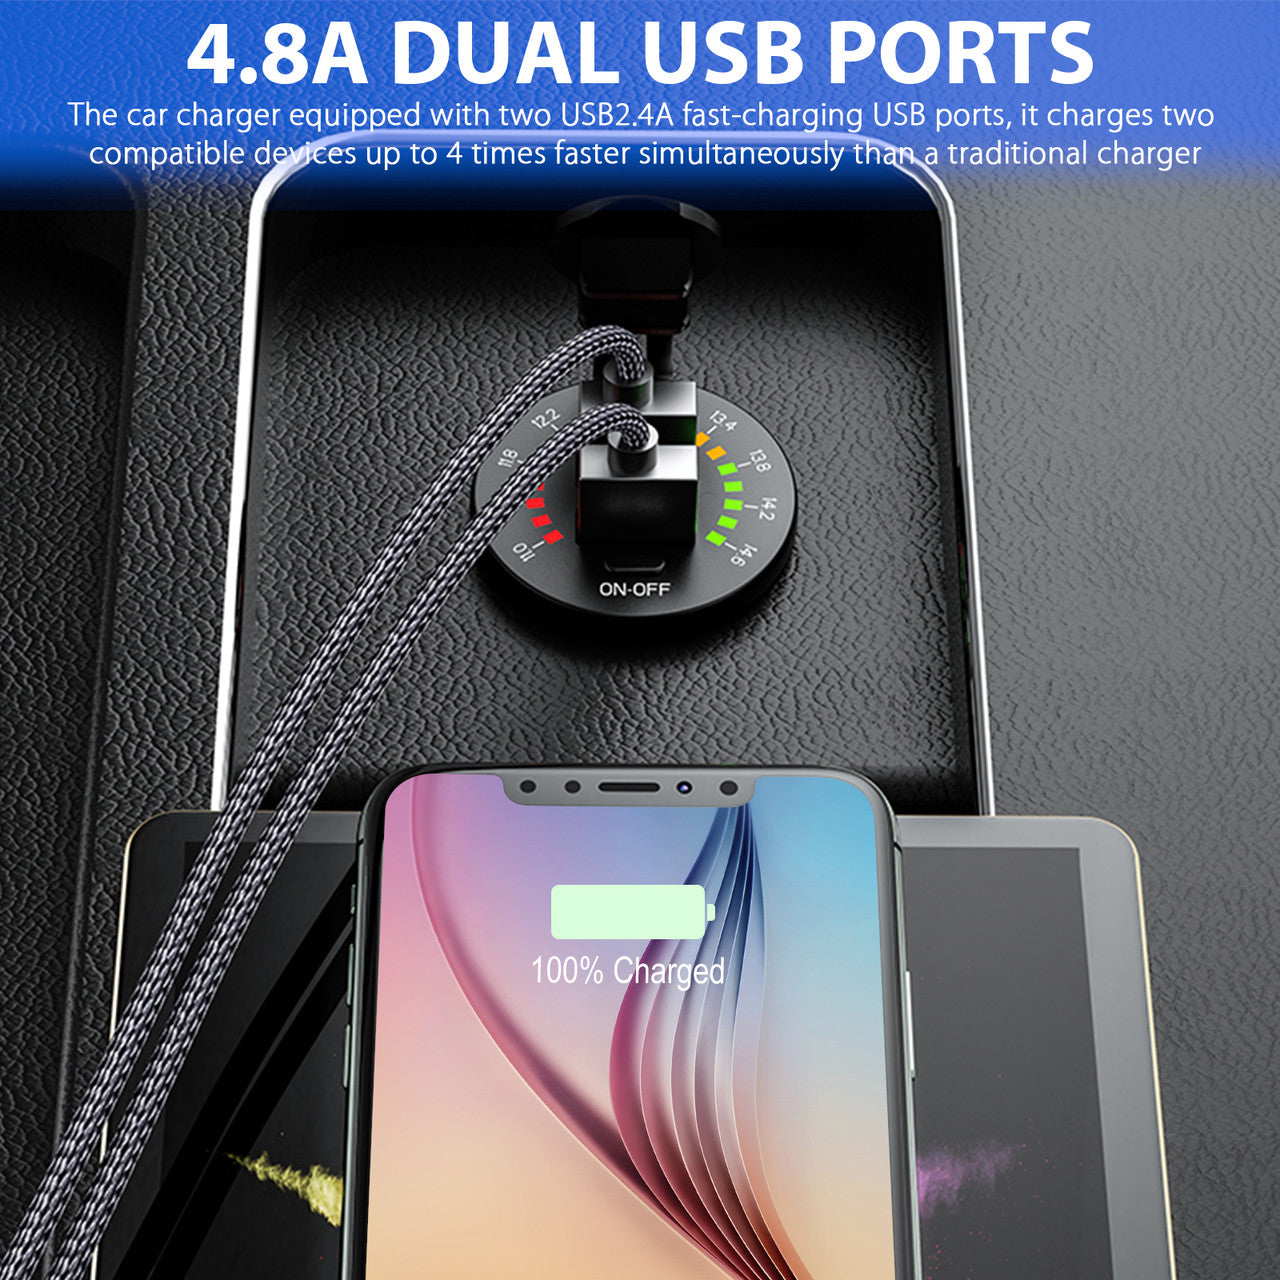 5V/ 4.8A Dual USB Charger Socket with 120W Cigarette Lighter Socket Splitter, Multicolor LED Charger Power Adapter Outlet with On/ Off Button, for 12-24V Car Boat Marine Truck, Waterproof